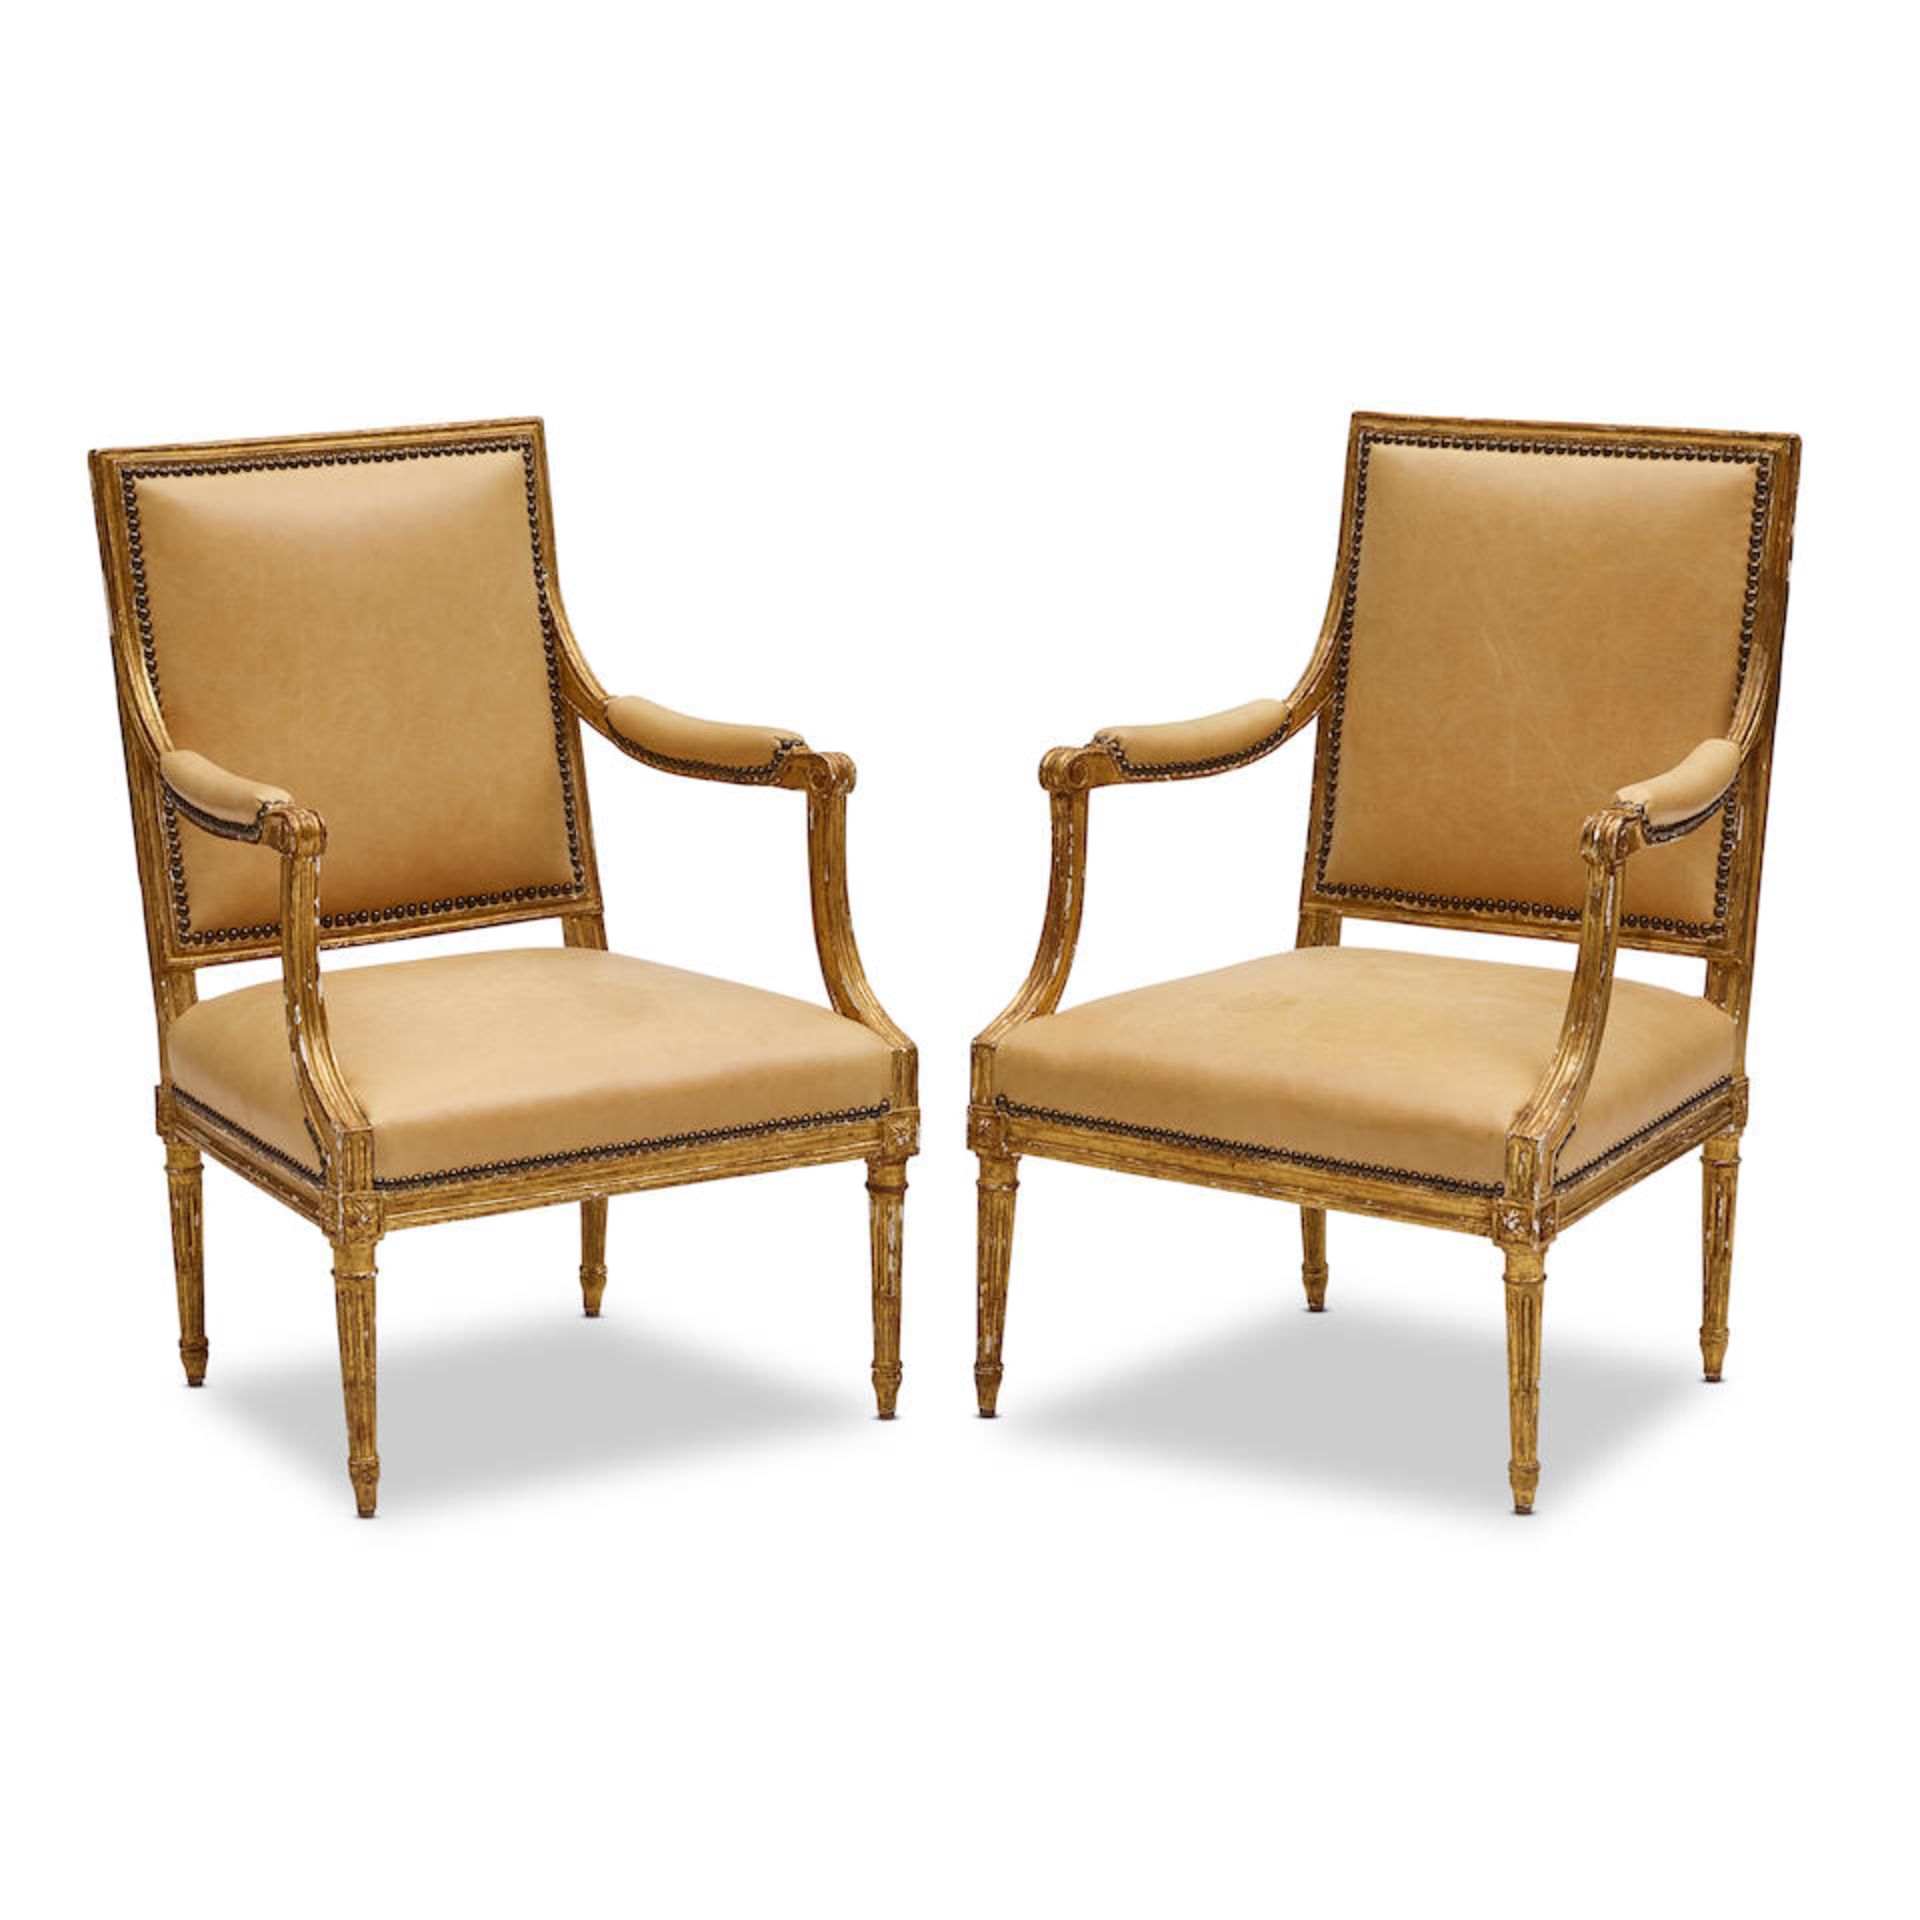 A PAIR OF LOUIS XVI GILTWOOD FAUTEUILS18th century